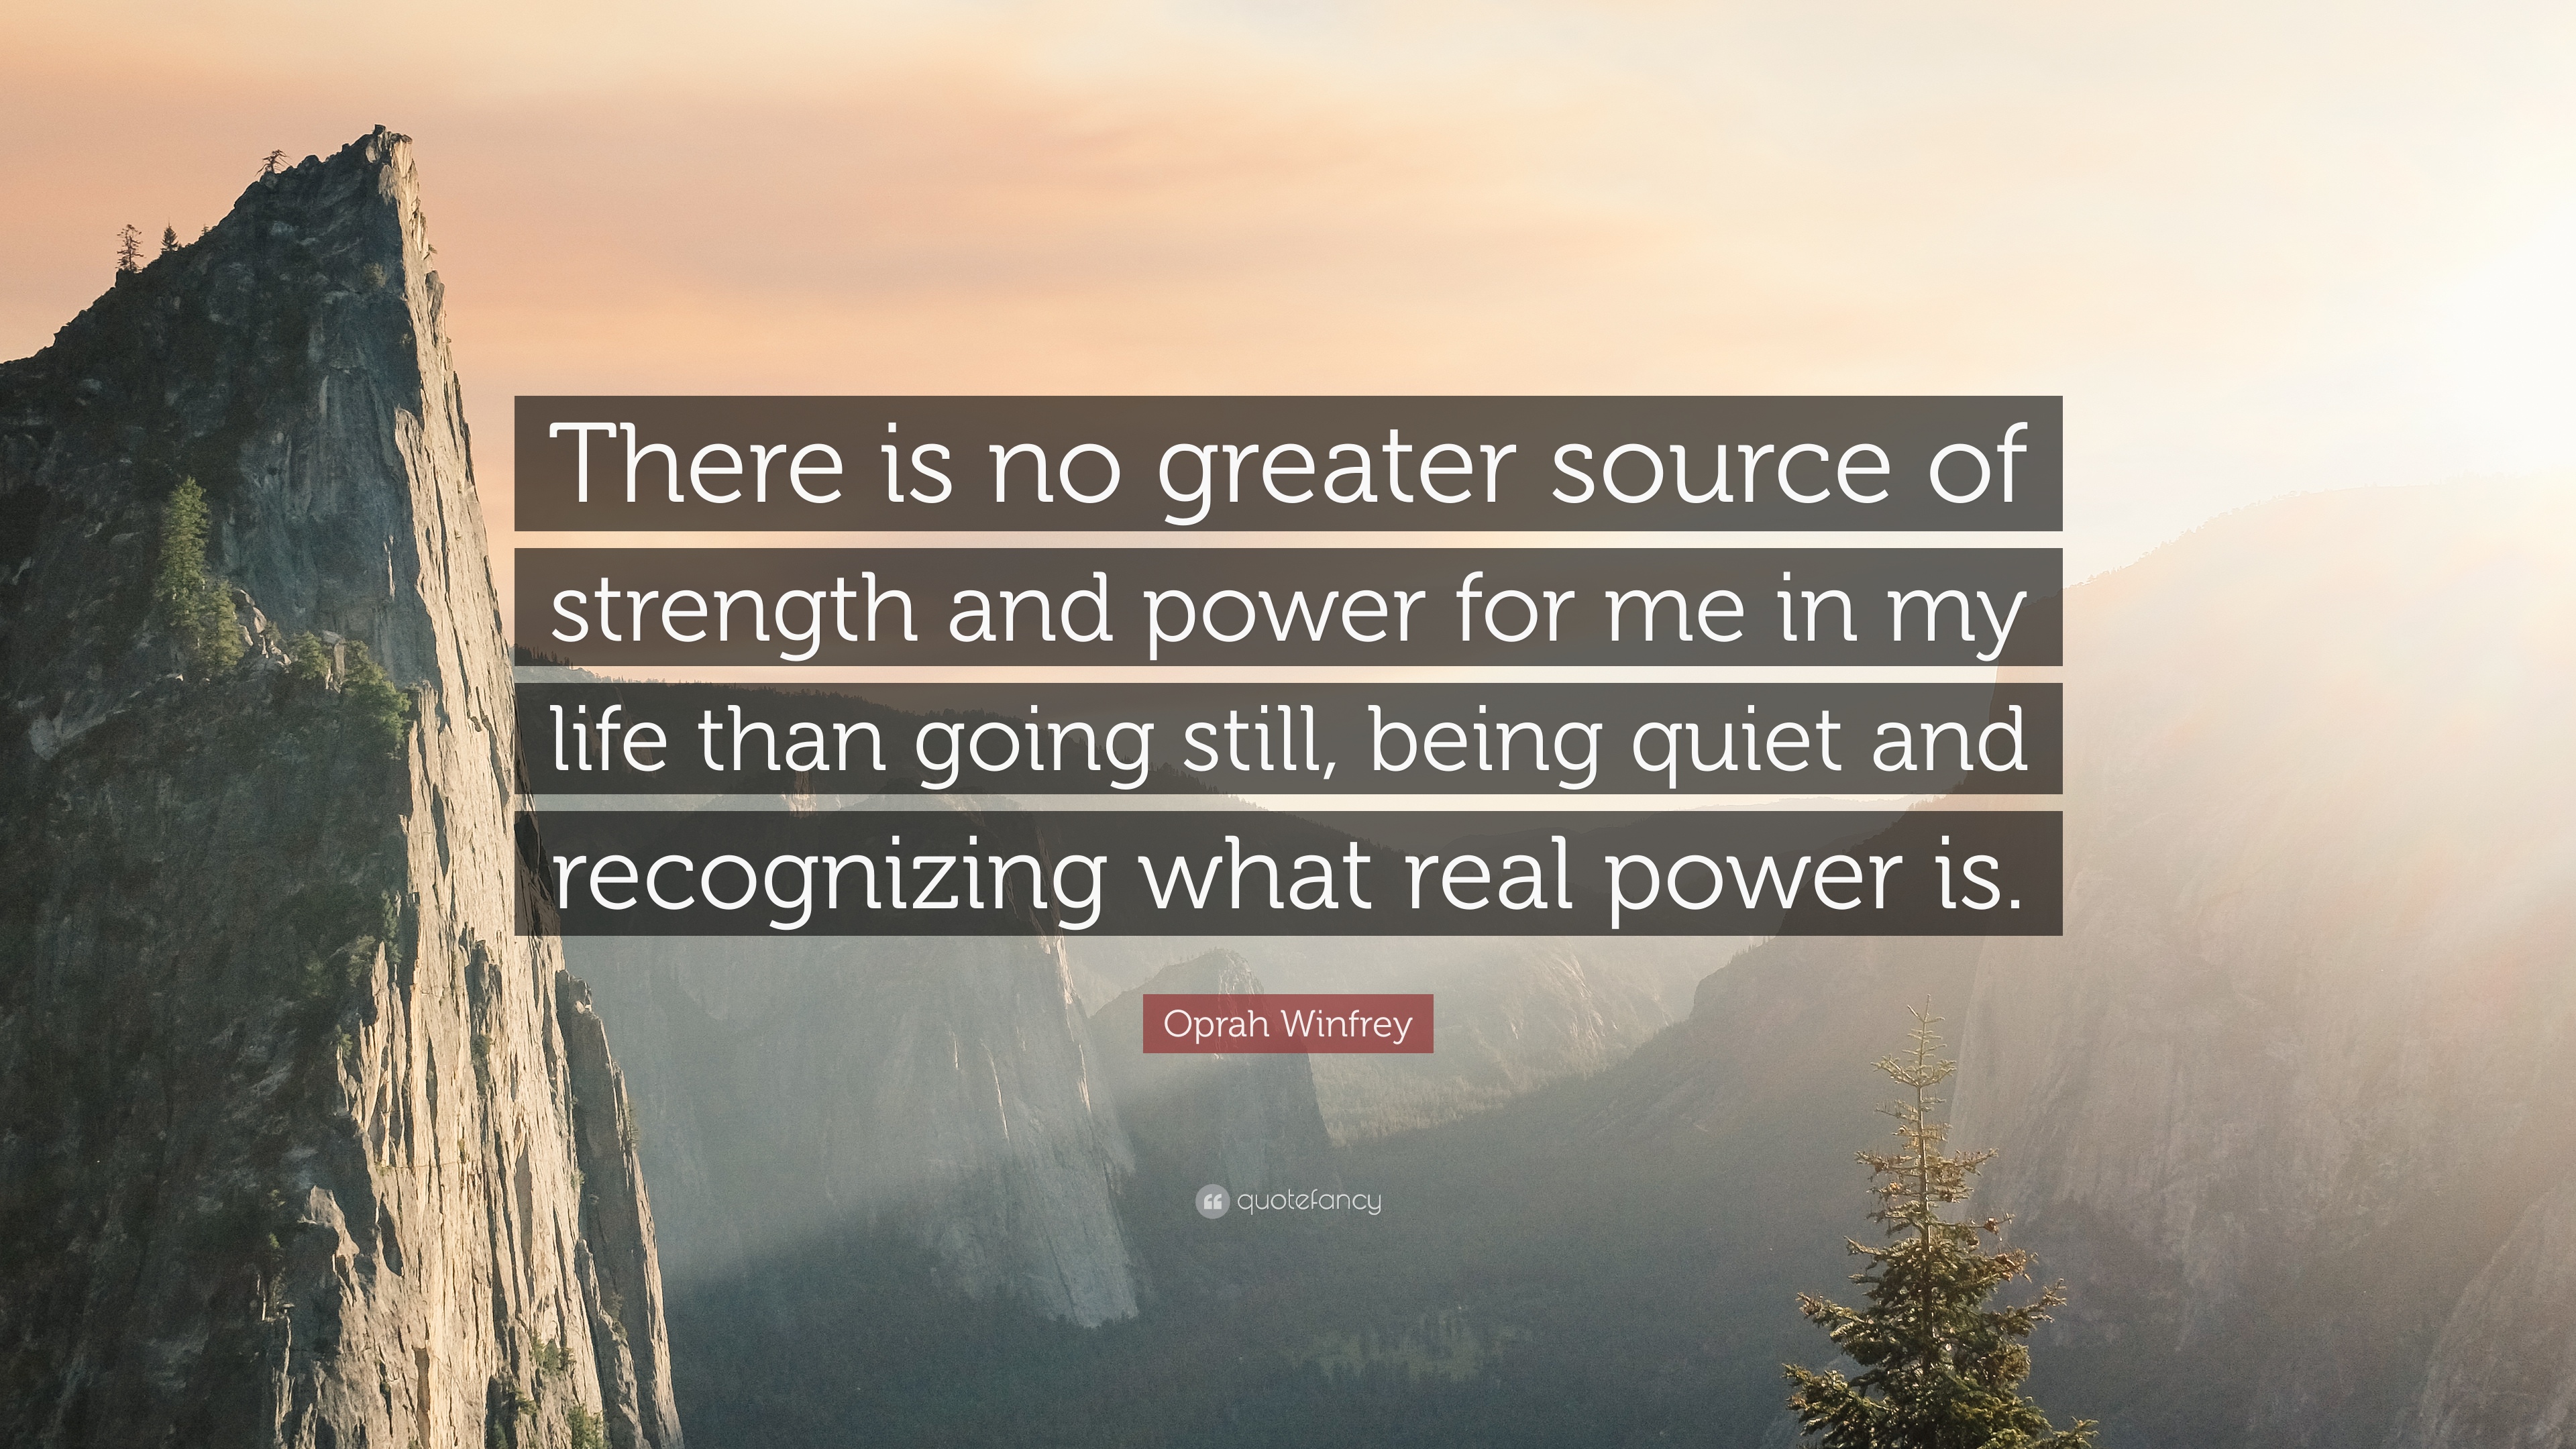 Oprah Winfrey Quote: “There is no greater source of strength and ...